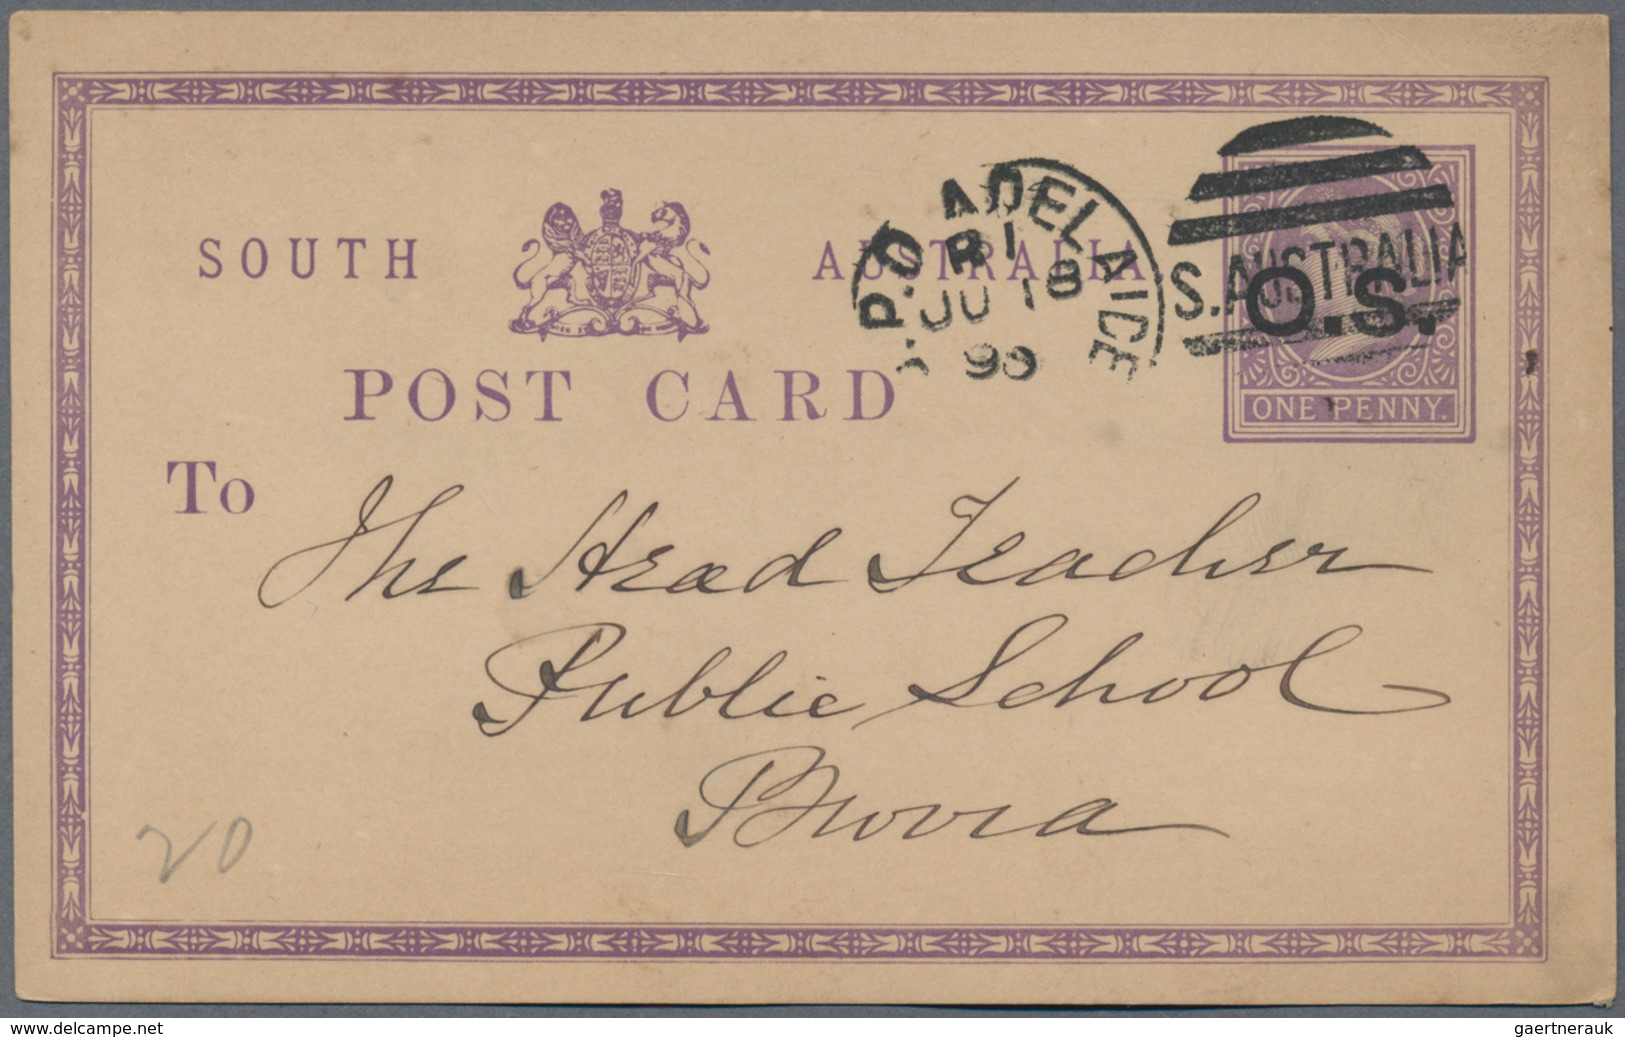 Australische Staaten: 1870's-1900's Ca.: More Than 160 Postal Stationery Items From Victoria, South - Collections